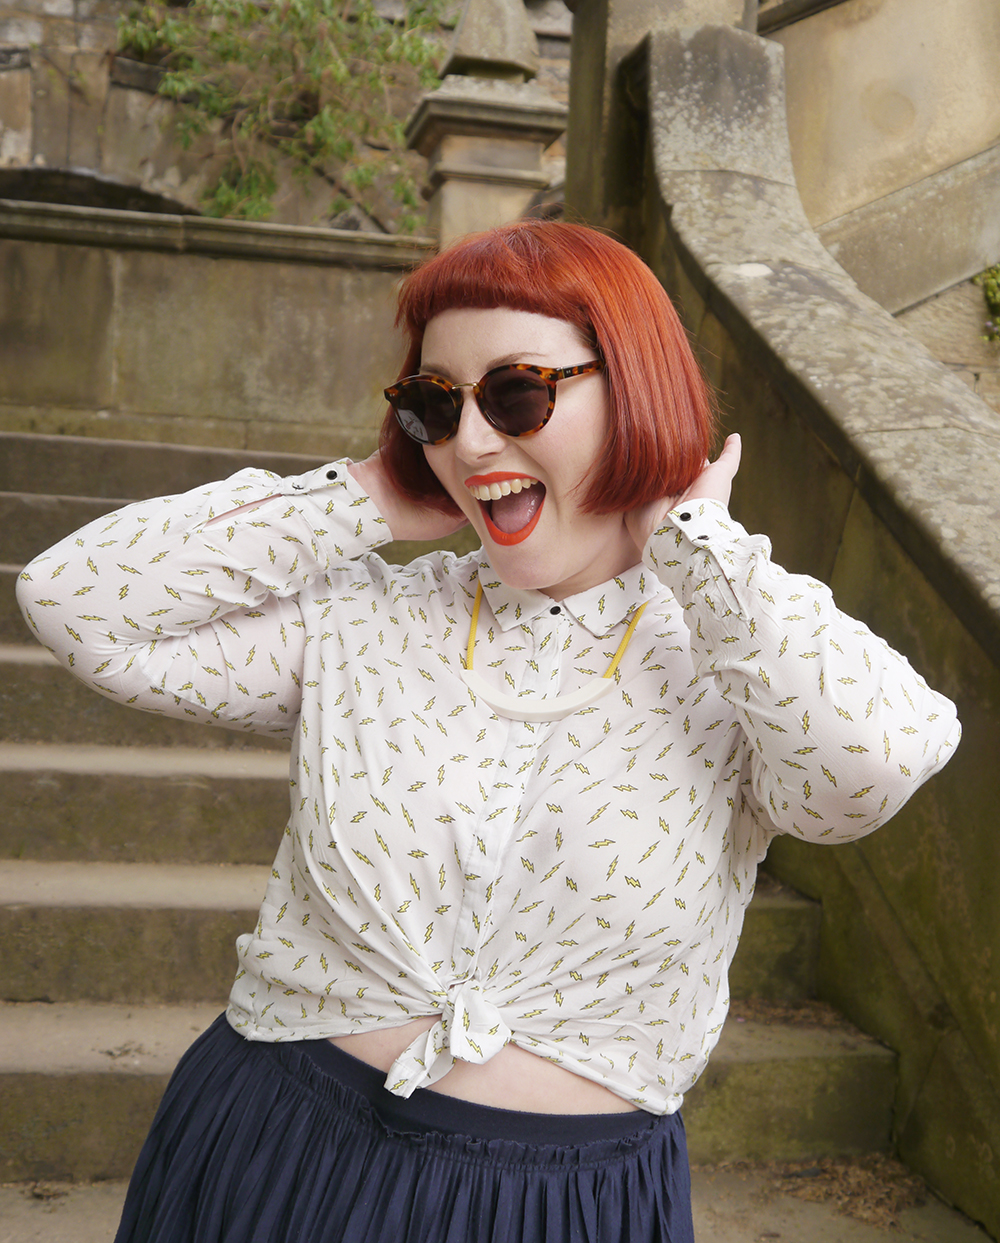 Scottish blogger, red head, Scottish street style, fun street style, colourful street style, colourful blogger, colourful outfit, red bob, ginger bob, sunlglasses style, #seewithiolla, iolla, Beth lamont necklace, yellow accessories, lightning bolt shirt, patterned shirt